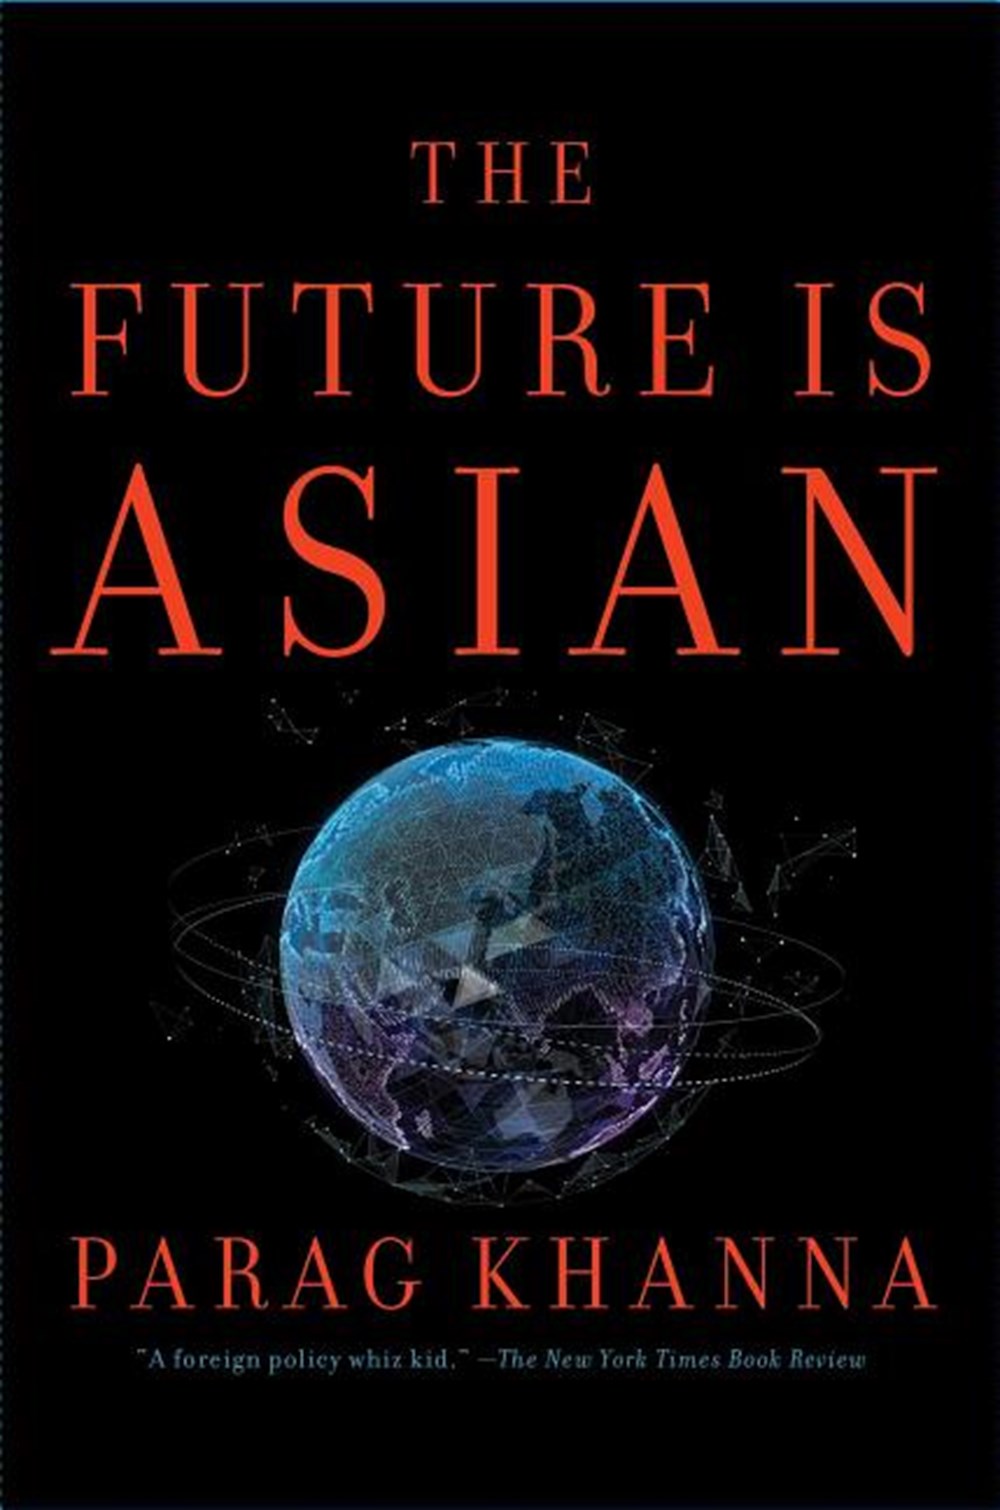 Future Is Asian Commerce, Conflict, and Culture in the 21st Century